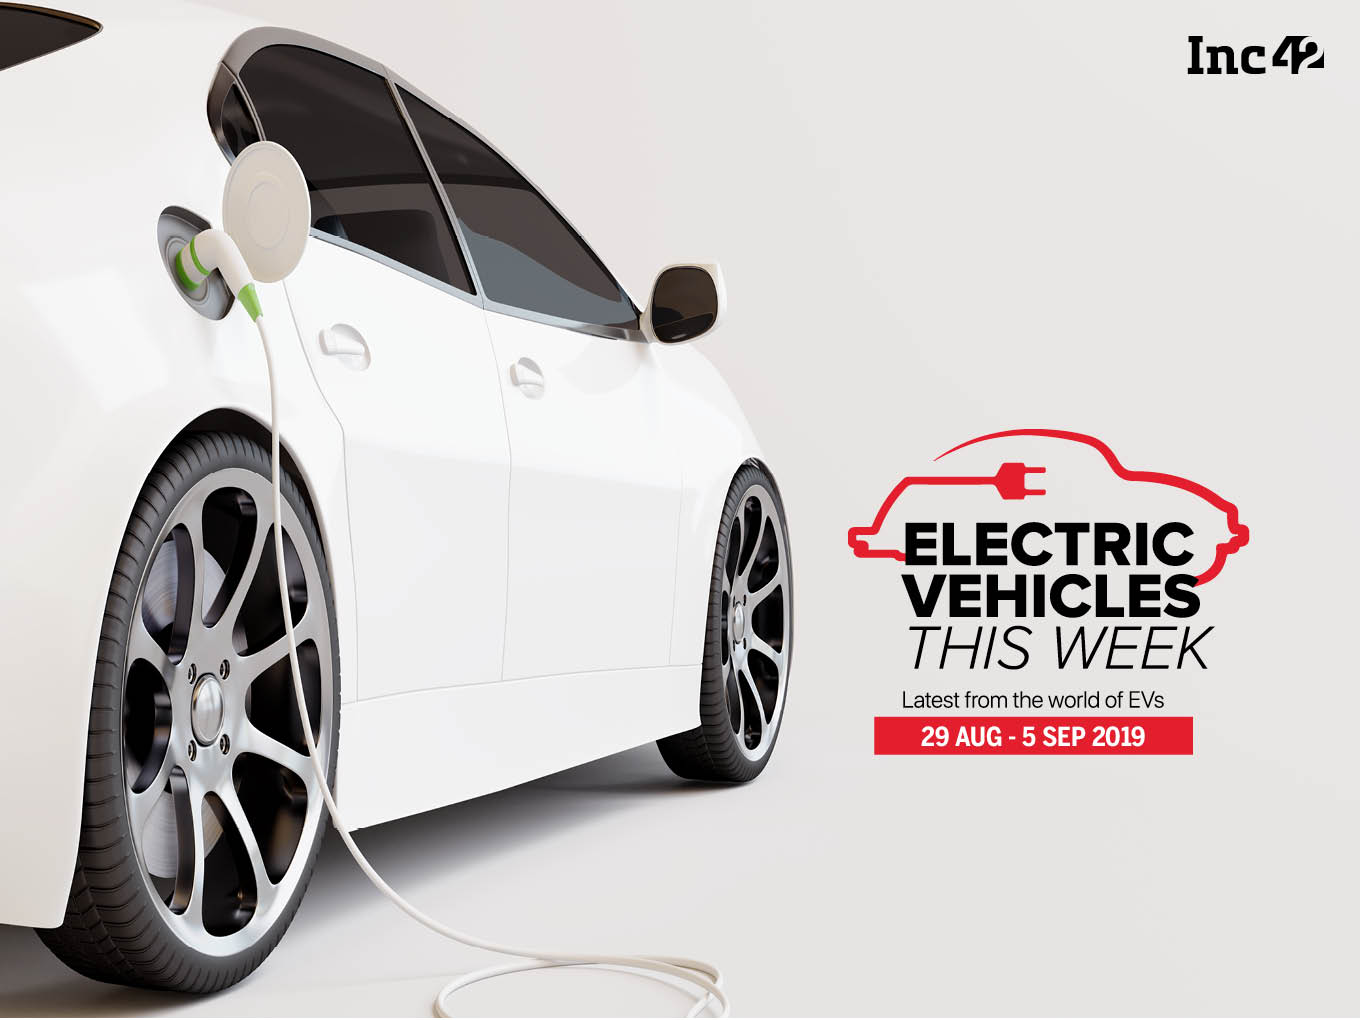 Electric Vehicles This Week: Govt To Subsidise Battery Manufacturing